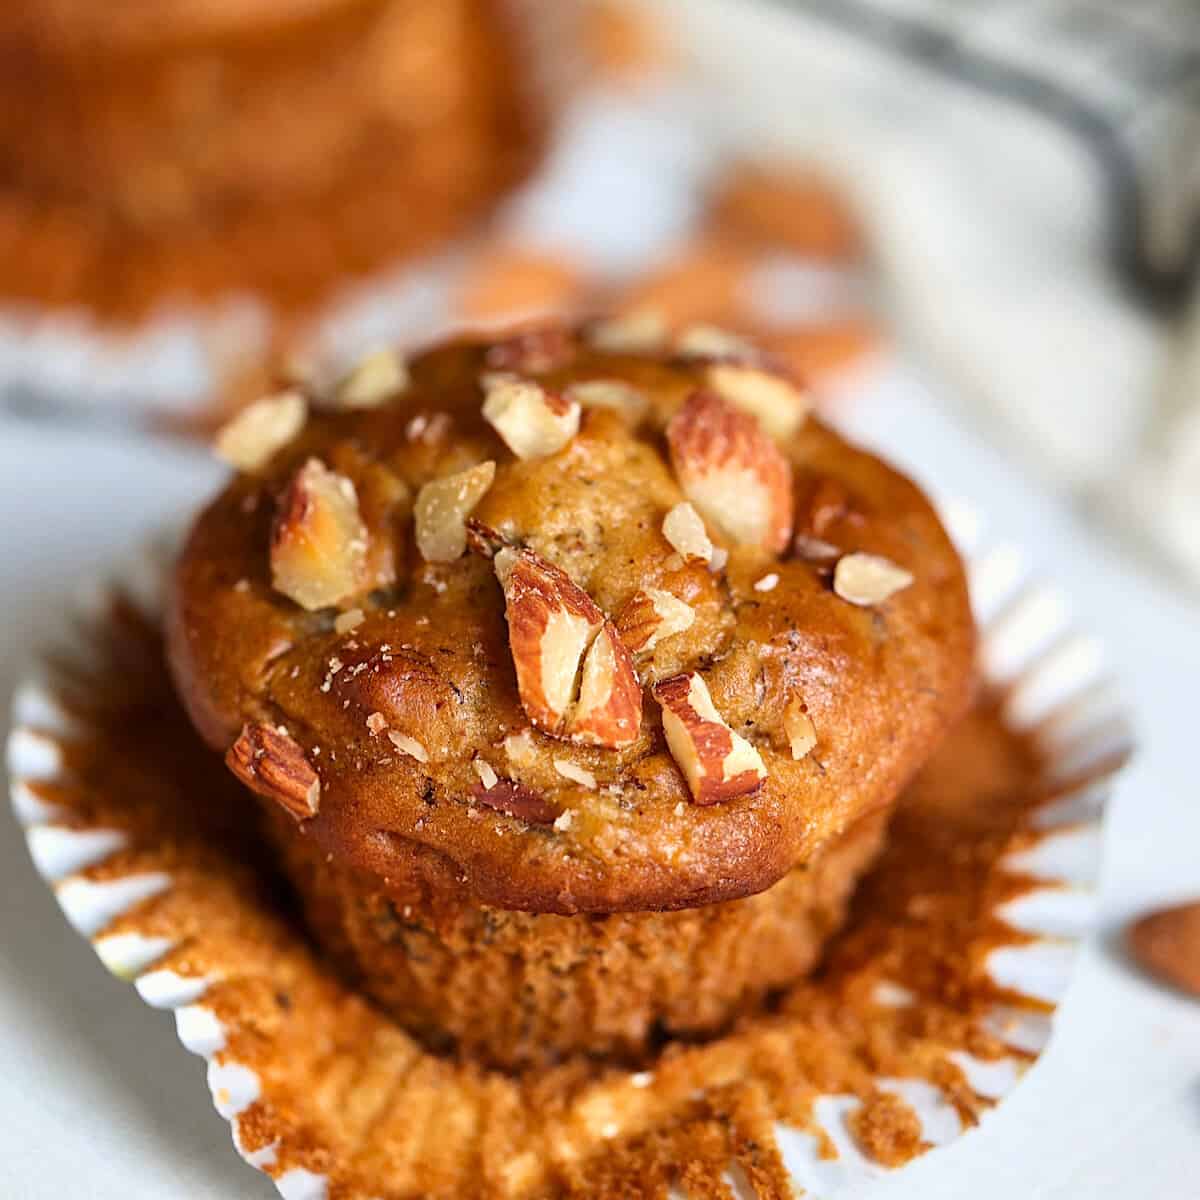 almond butter banana muffin on a serving board